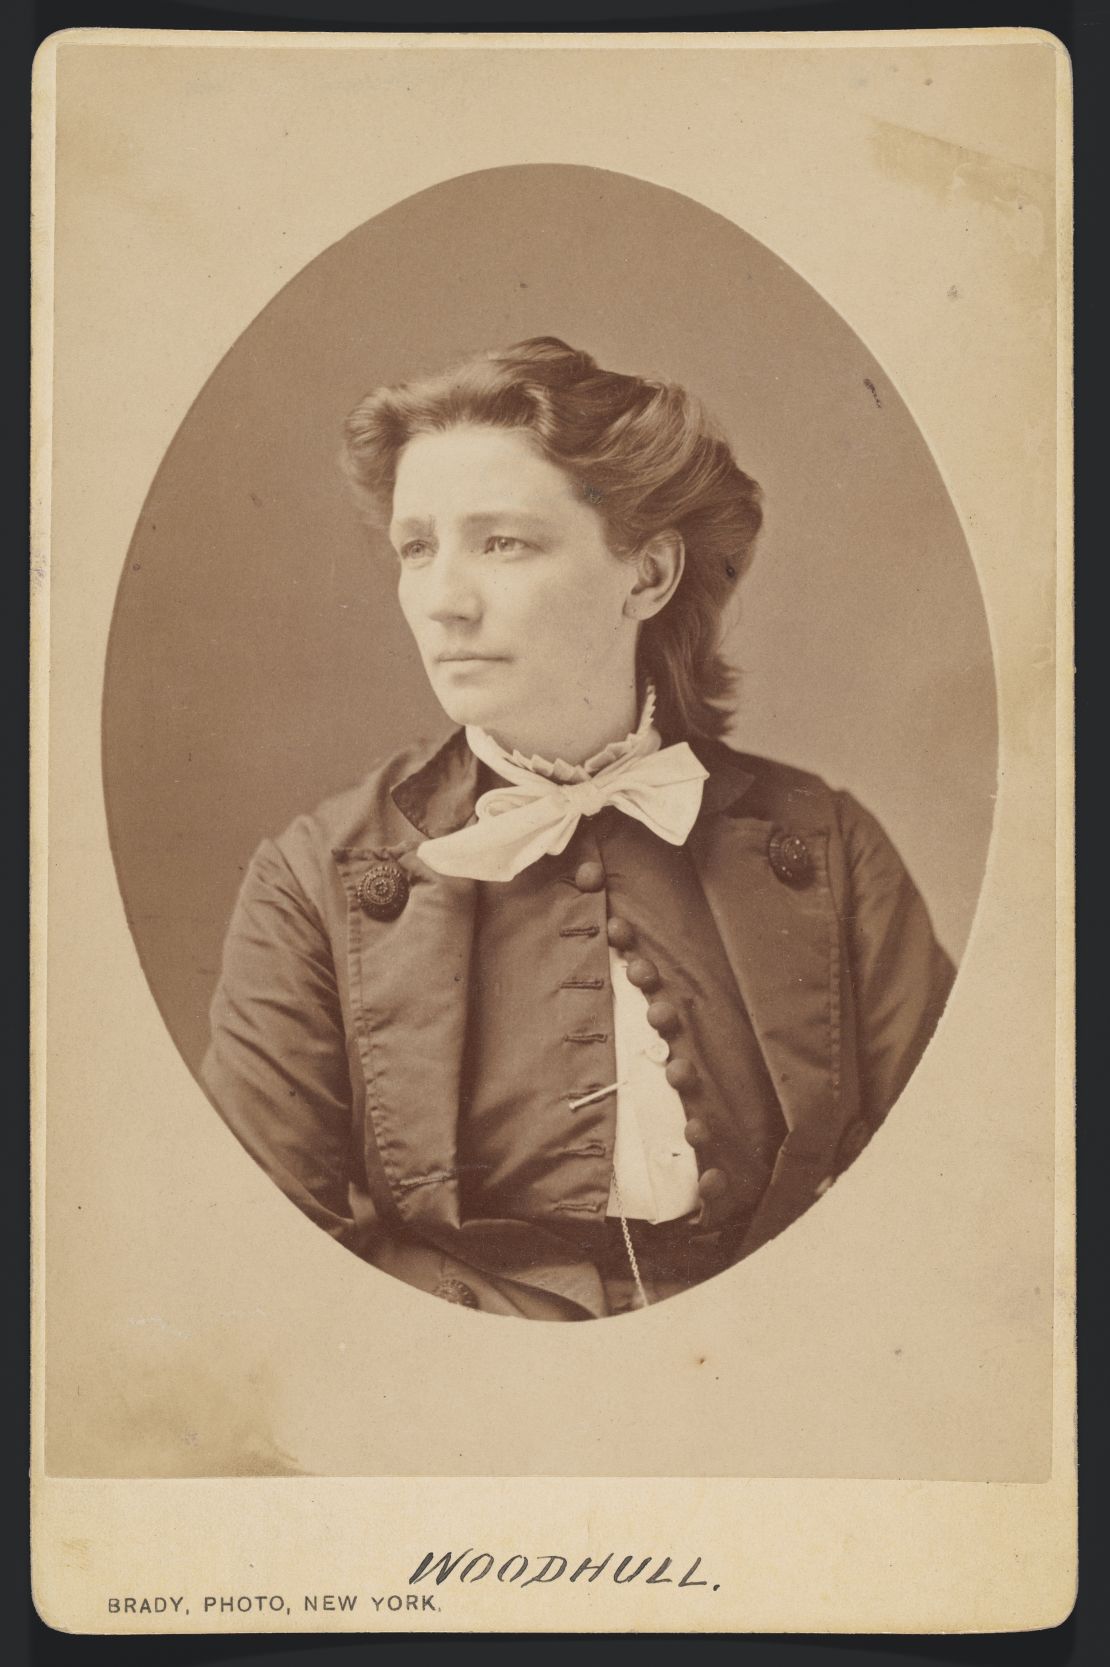 A c. 1870 portrait of Victoria Claflin Woodhull, who ran for President of the United States in 1872. 